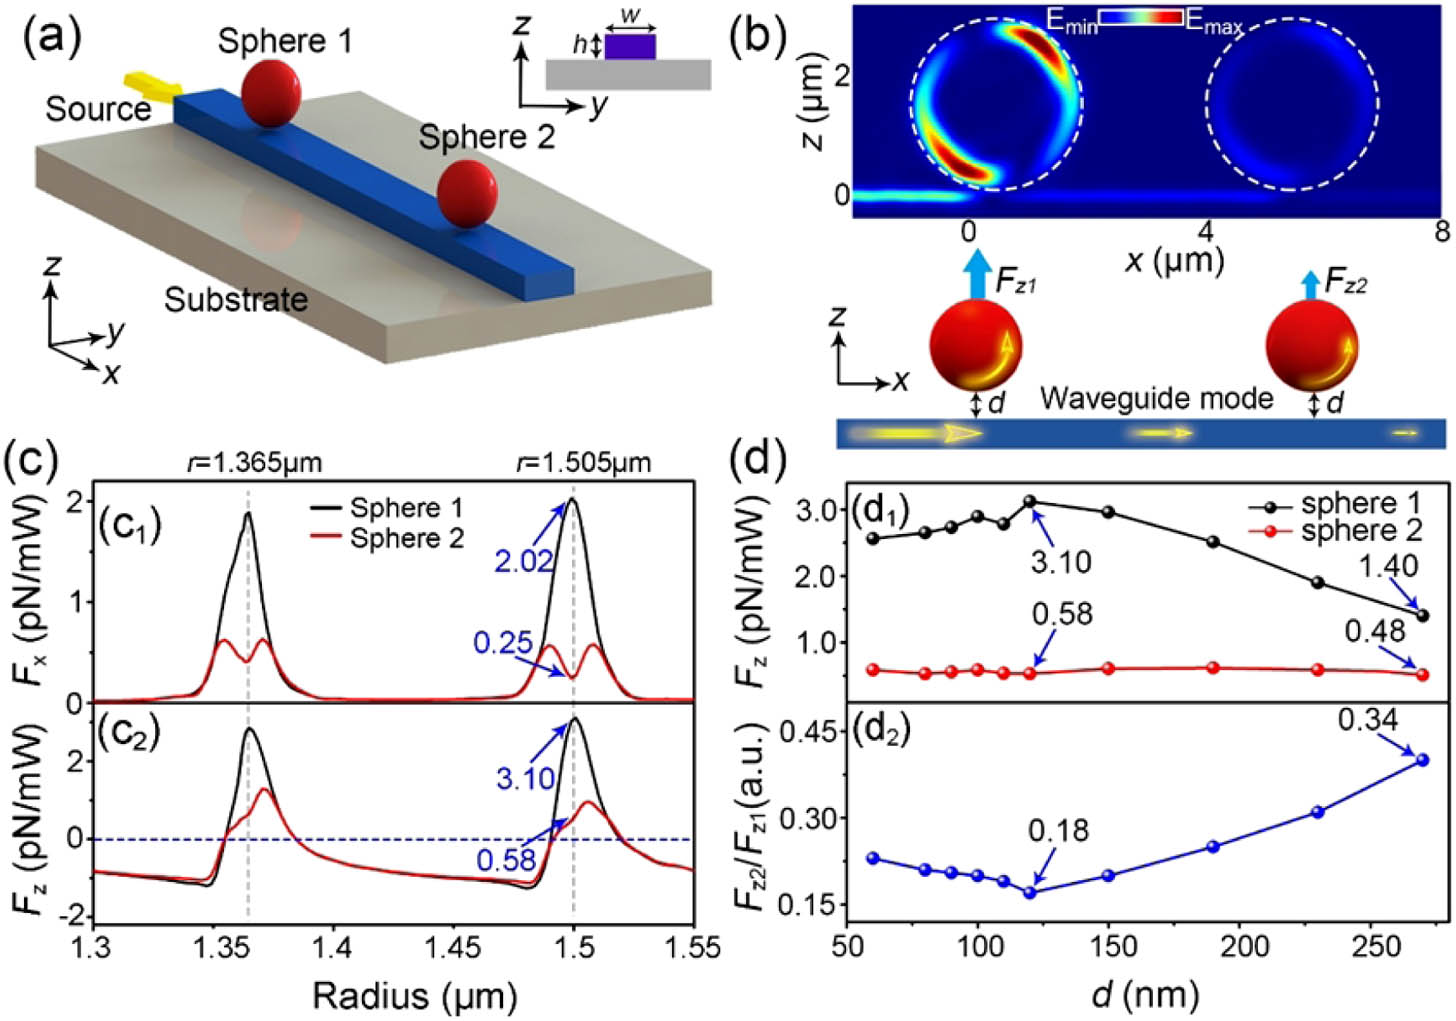 Schematic and performances of resonant optical manipulation using the traditional optical waveguide. (a) Schematic of optical manipulation based on a strip waveguide (GaAs). The parameters are w=1 μm, h=0.2 μm, and light source frequency of f=315 THz. The two red spheres are to be manipulated in water. (b) The resonance of sphere 1 with the incident light generates a large repulsive force Fz1. The repulsive force Fz2 on sphere 2, however, is 1 order smaller than Fz1, because the guiding mode is greatly scattered by sphere 1. (c) Optical forces of Fx (upper part) and Fz (lower part) as a function of particle radius r. (d) Resonance force Fz on the two particles (upper part) and the ratio Fz2/Fz1 (lower part) as a function of the distance d between the waveguide and the particle.